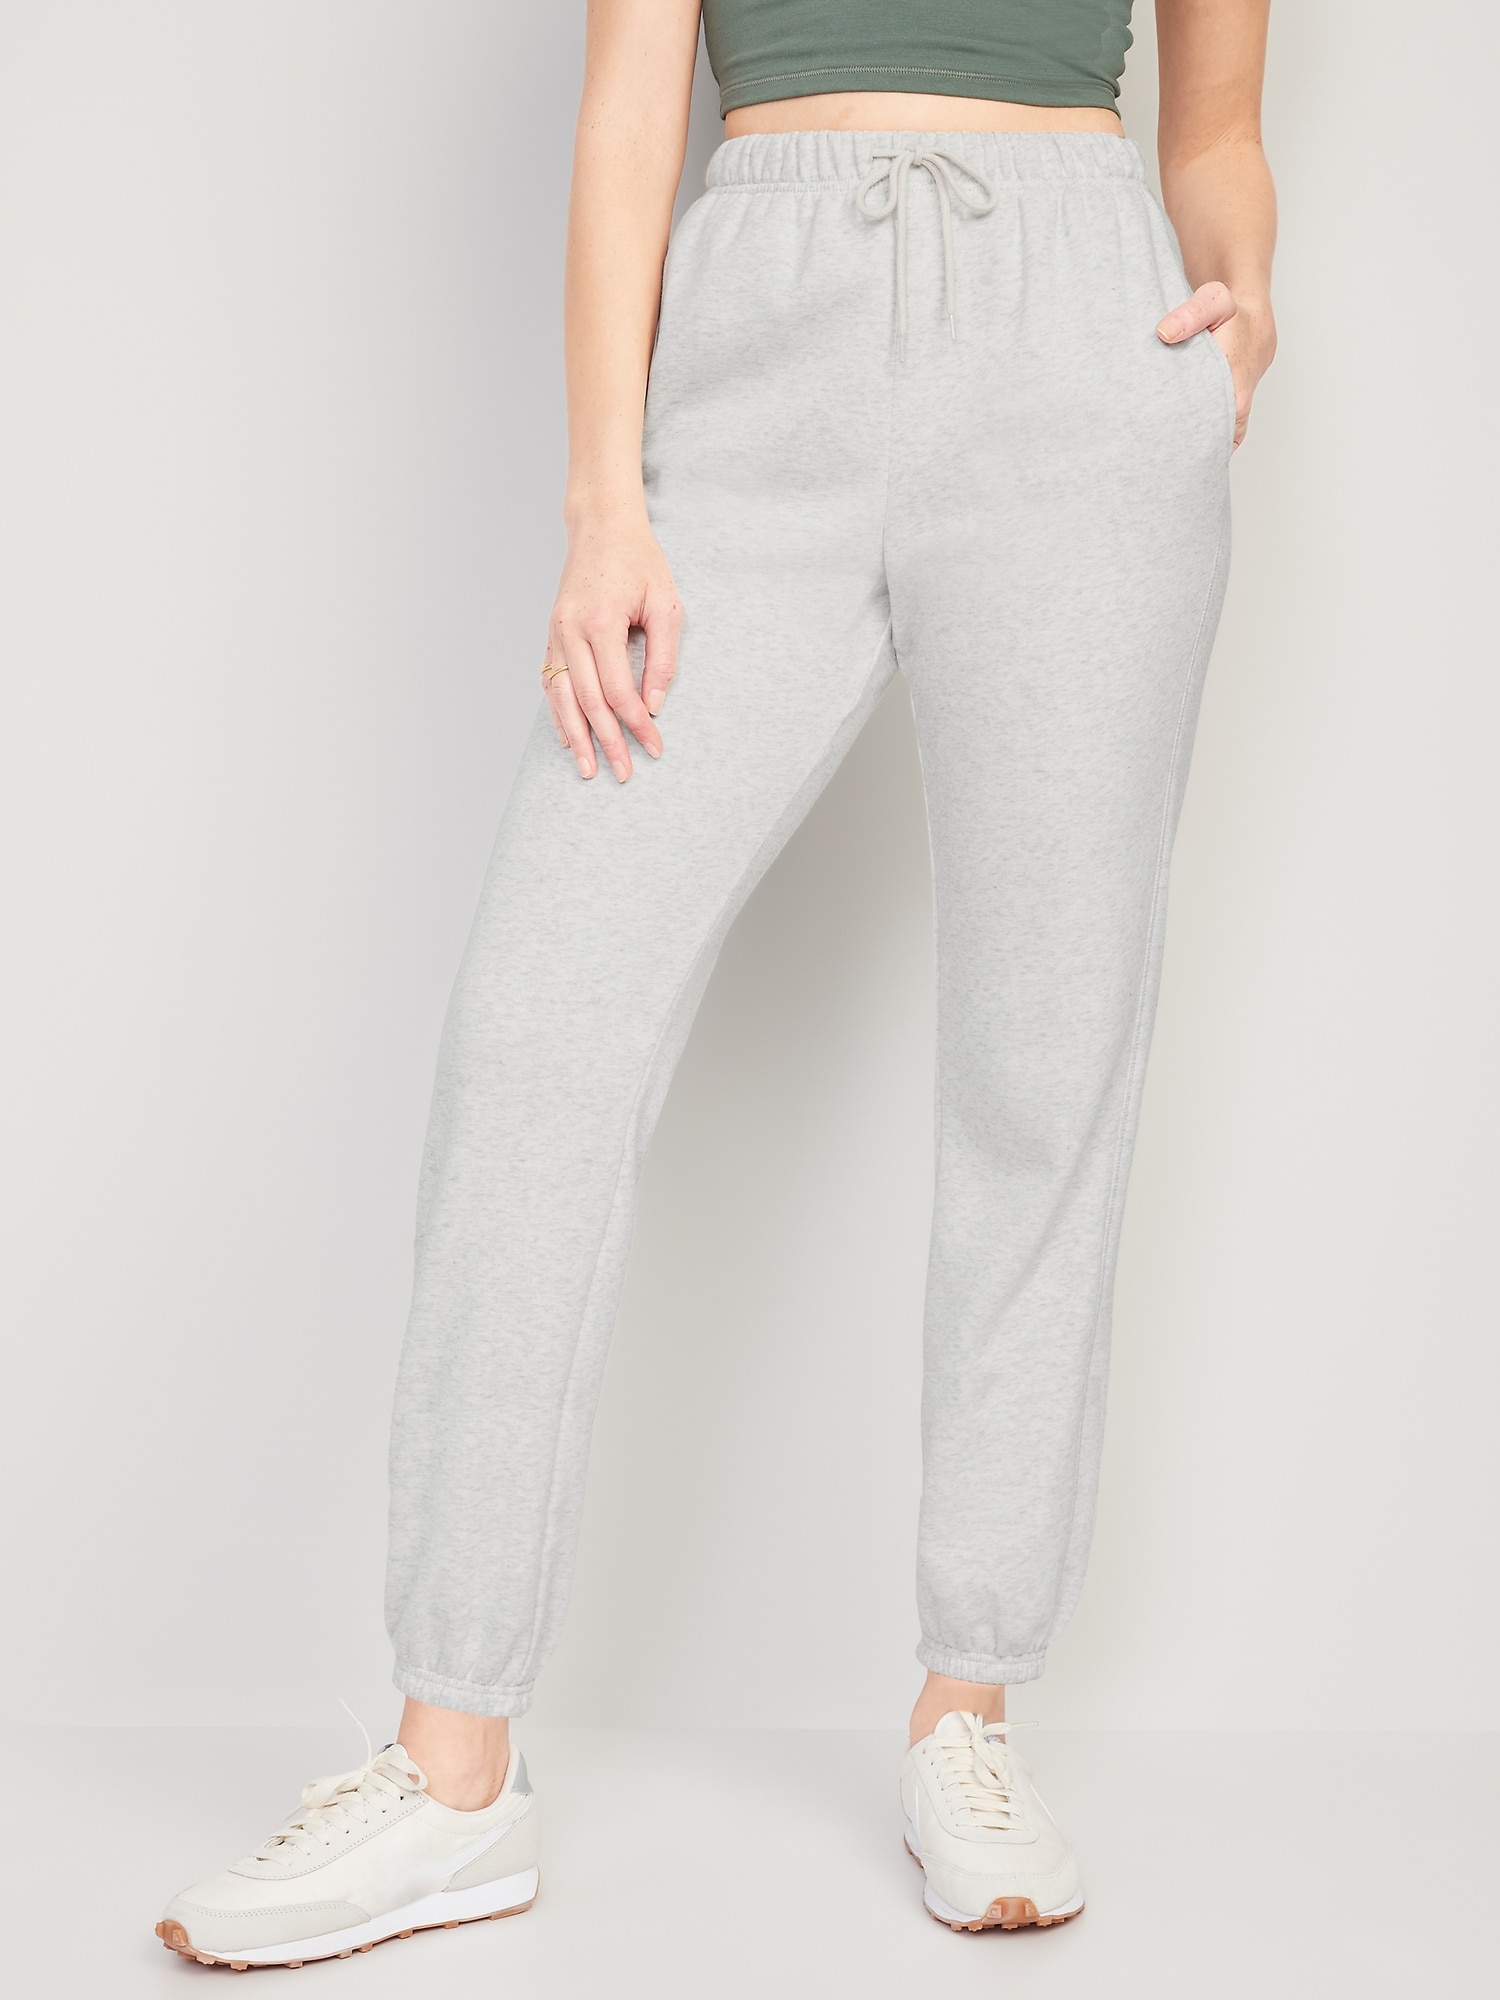 Extra High-Waisted Straight Ankle Sweatpants for Women